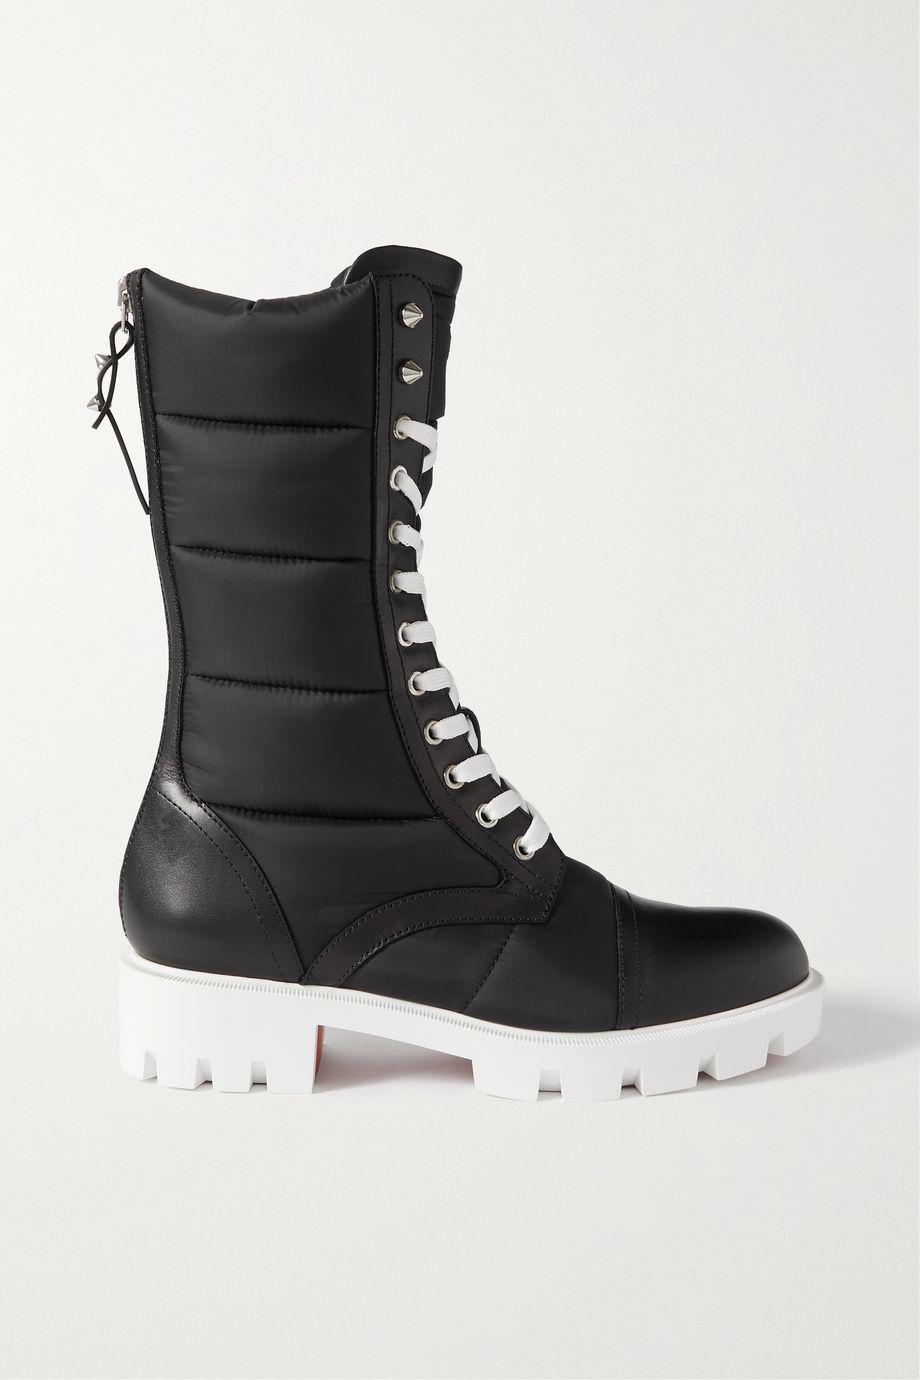 Pavleta leather-trimmed quilted shell boots by CHRISTIAN LOUBOUTIN